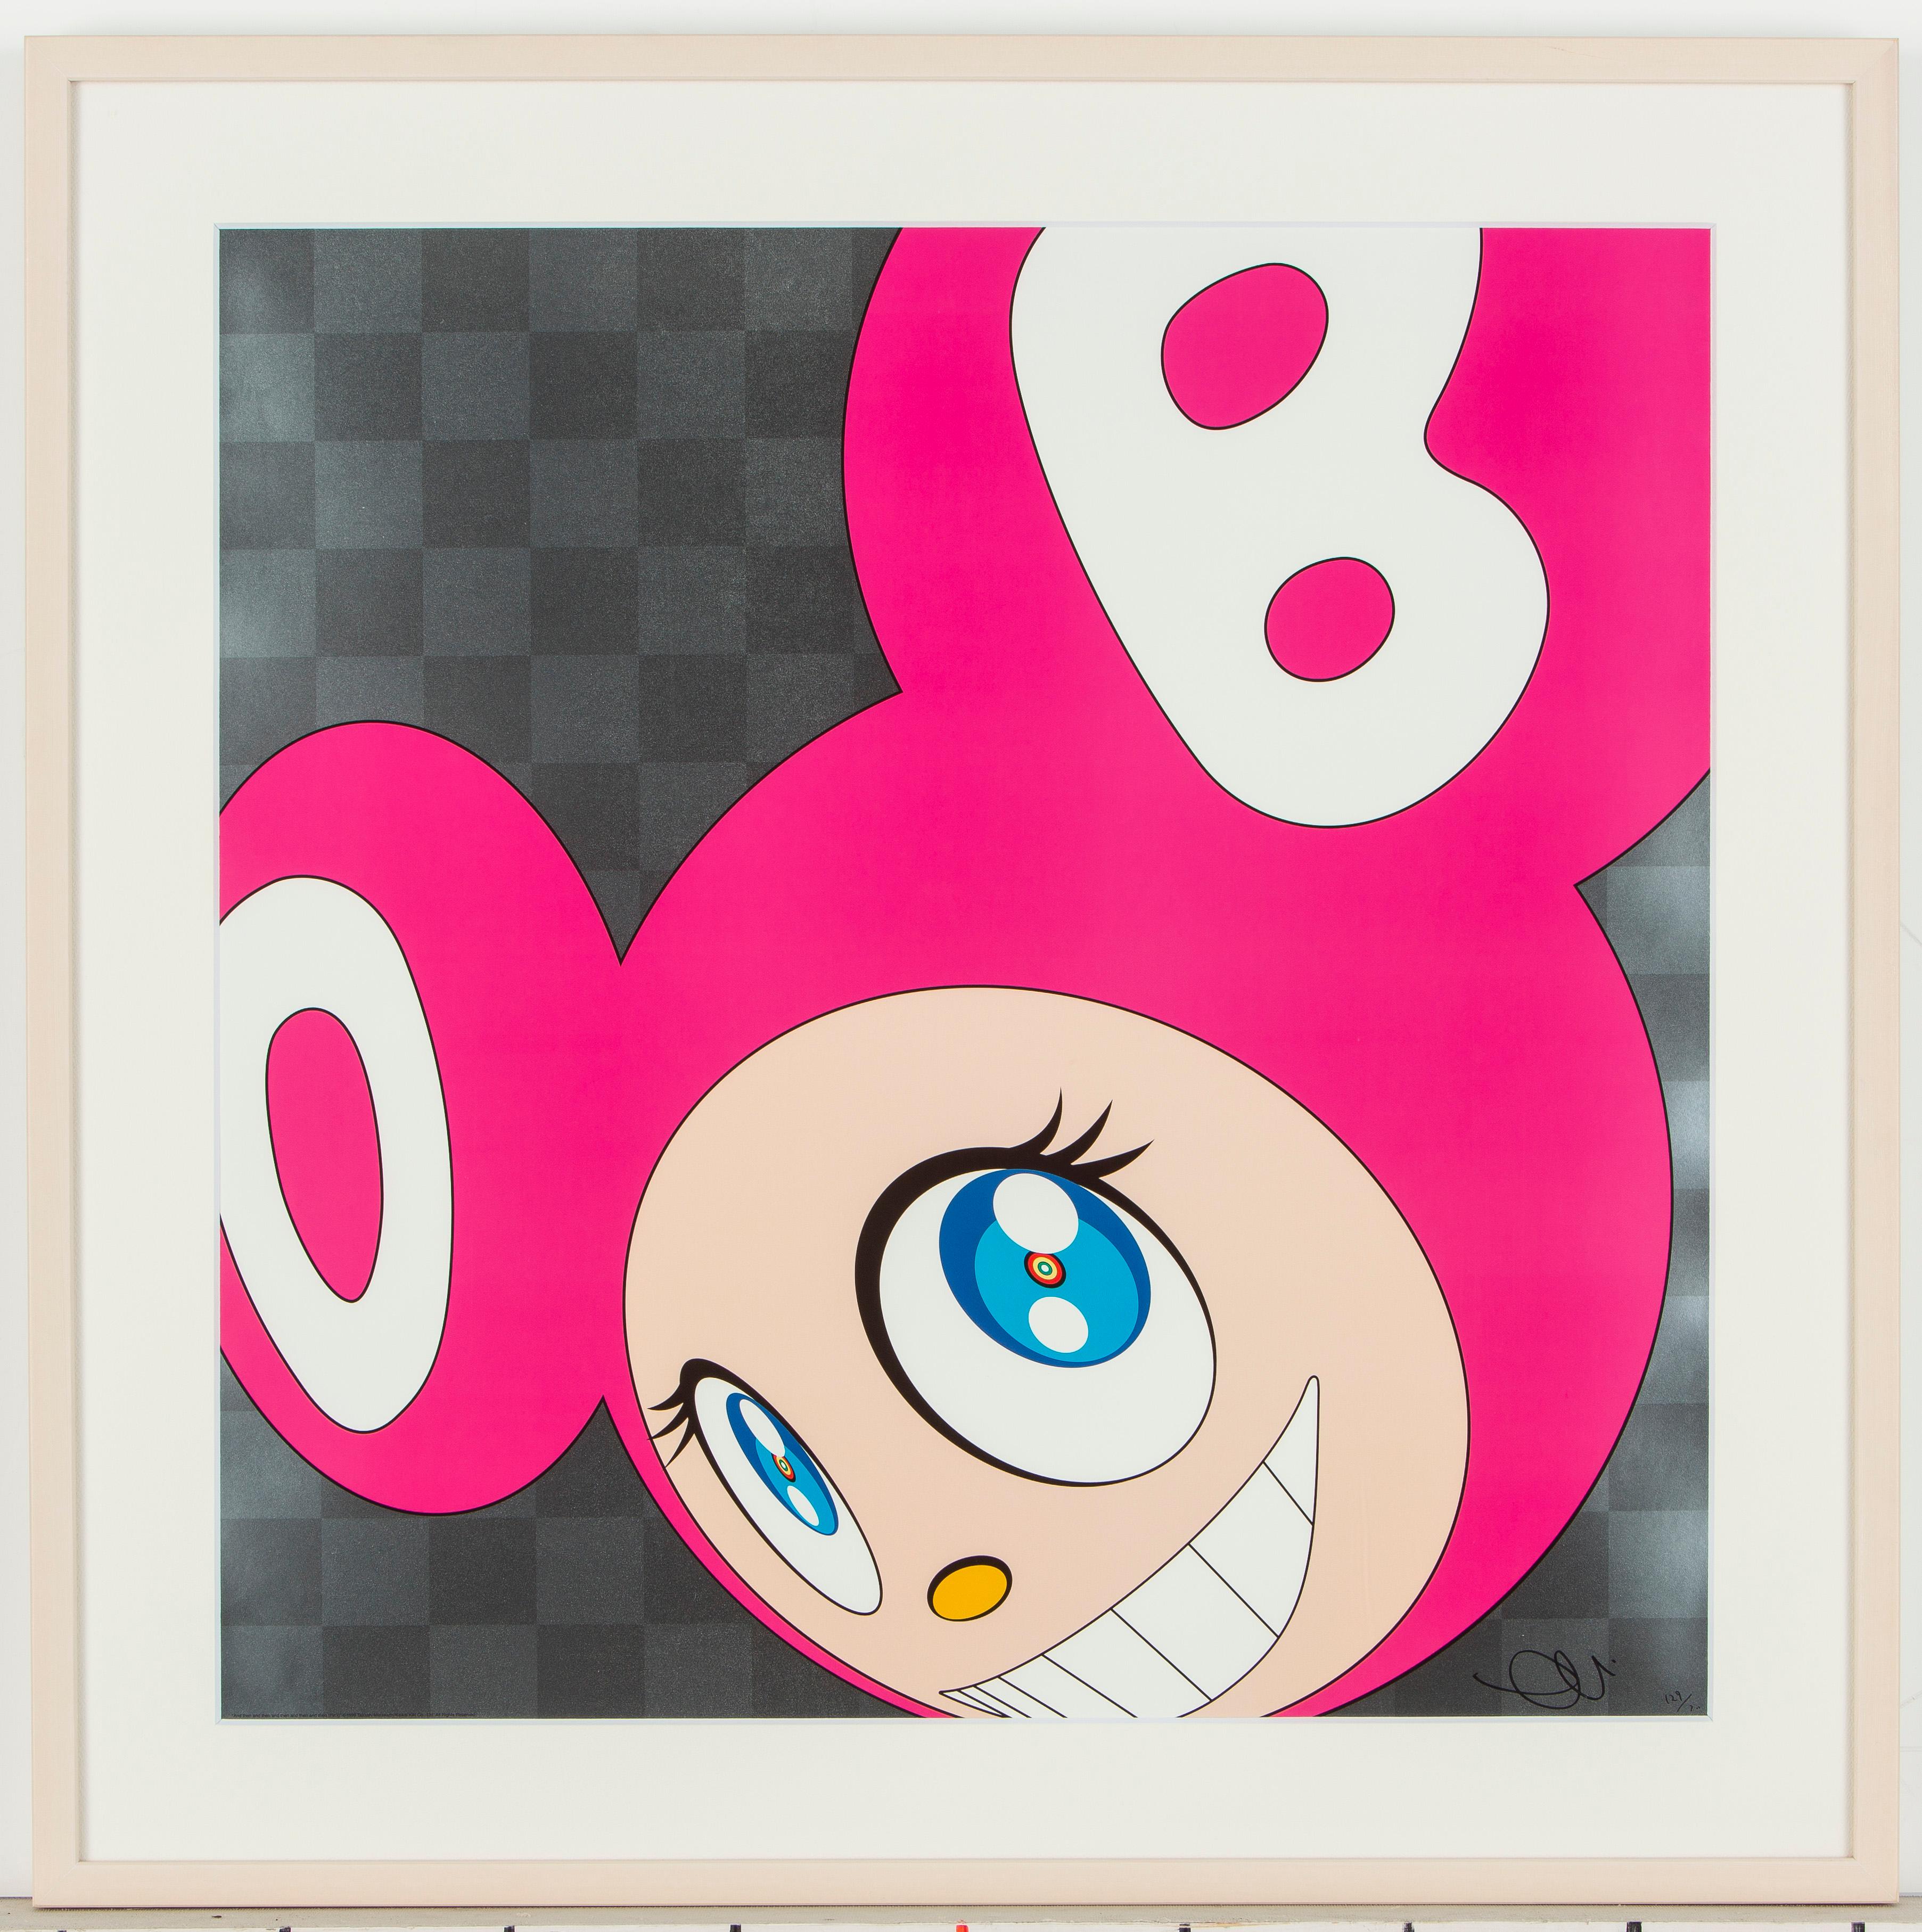 And Then and then and then and then and then (Pink), 1999 by Takashi Murakami
Offset print, in silver ink signed and numbered by the artist
26 4/5 × 26 4/5 in
68 × 68 cm
Edition 129/300

The design for Mr. DOB was inspired by several animated